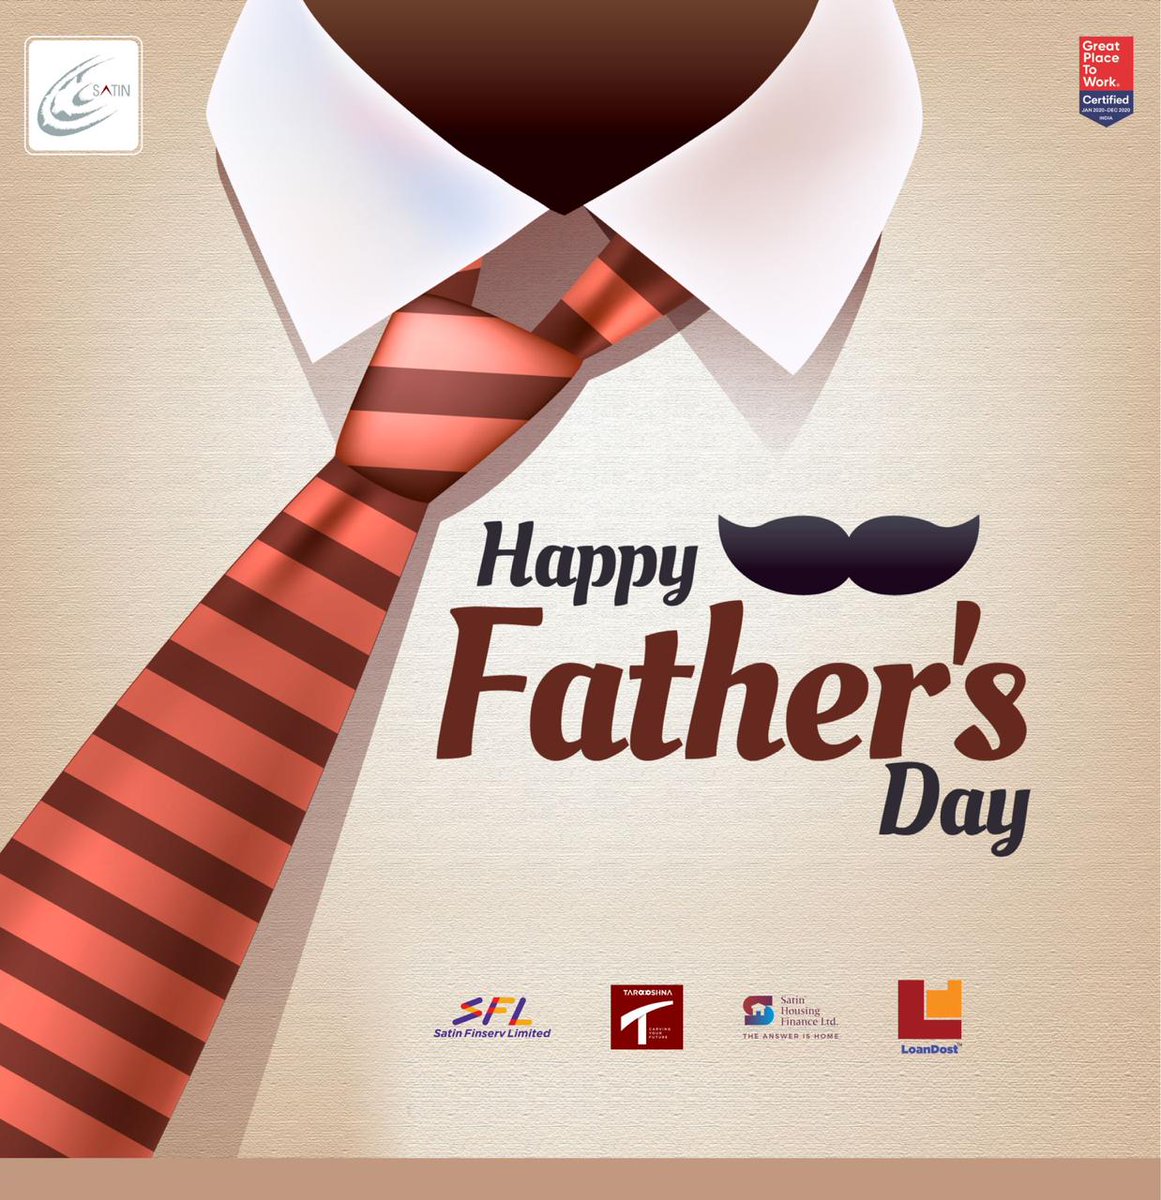 'A father is neither an anchor to hold us back nor a sail to take us there, but a guiding light whose love shows us the way'

SATIN wishes a very happy Father's Day to everyone.

#Father #Greatestgift #masterpieceofnature #HappyFather'sDay